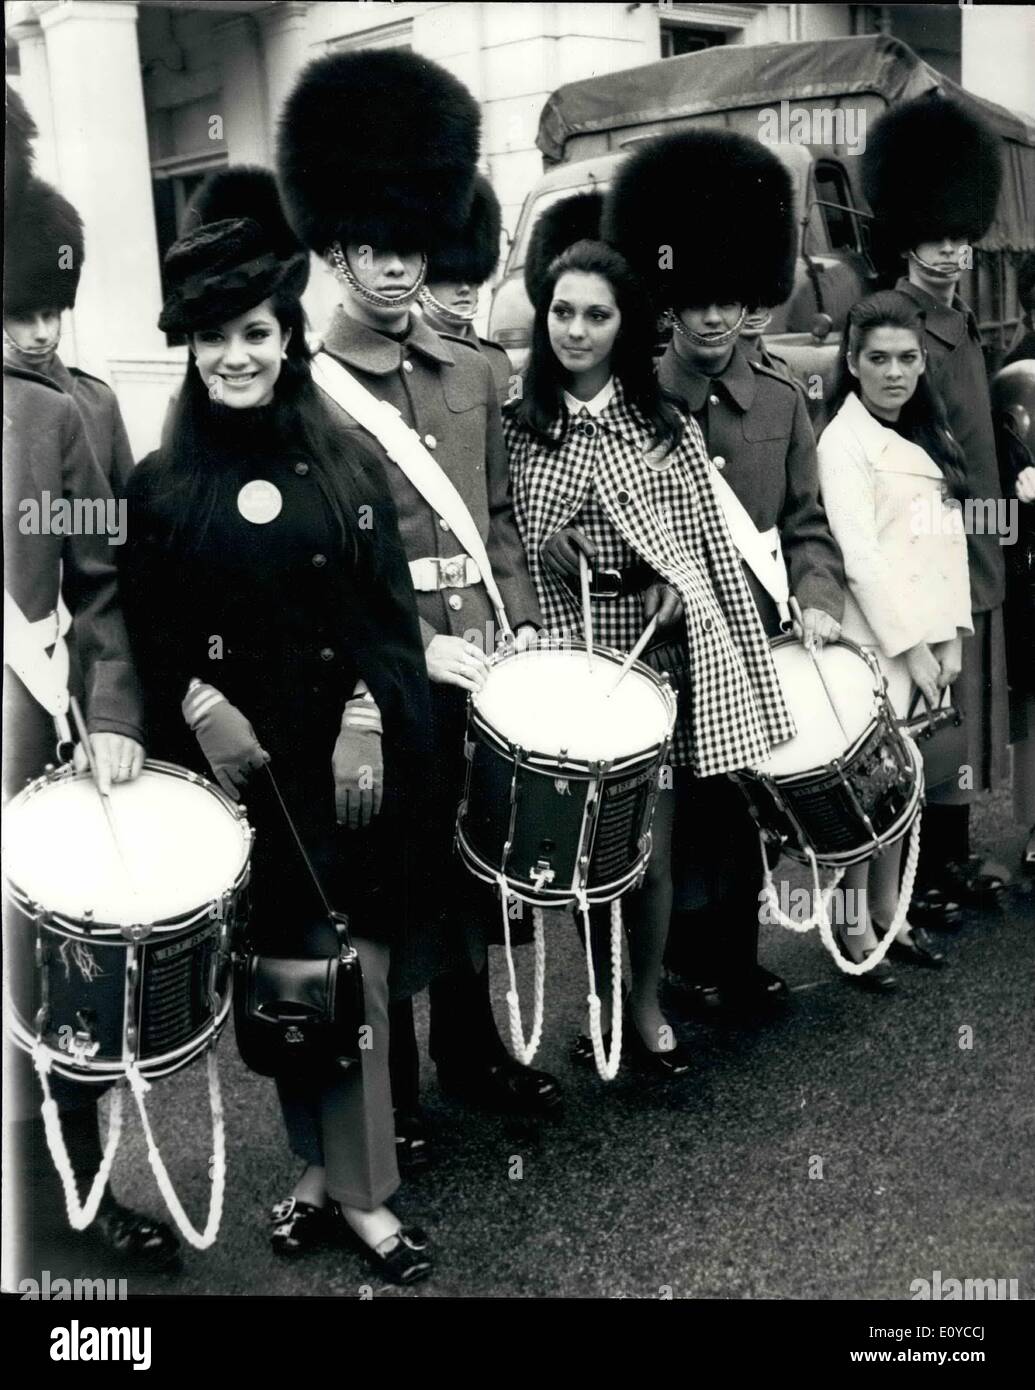 Nov. 11, 1969 - Miss World's Visit Horse Guards: Many of the contestants taking part in the Miss World Contest next Thursday, were out and about in London this morning-one of the first placeses they visited was Wellington Barracks to see the Horse Guards. Photo Shows Seen with members of the Guard Band L-R. Miss Paraguay, and Miss Venezuela. Stock Photo